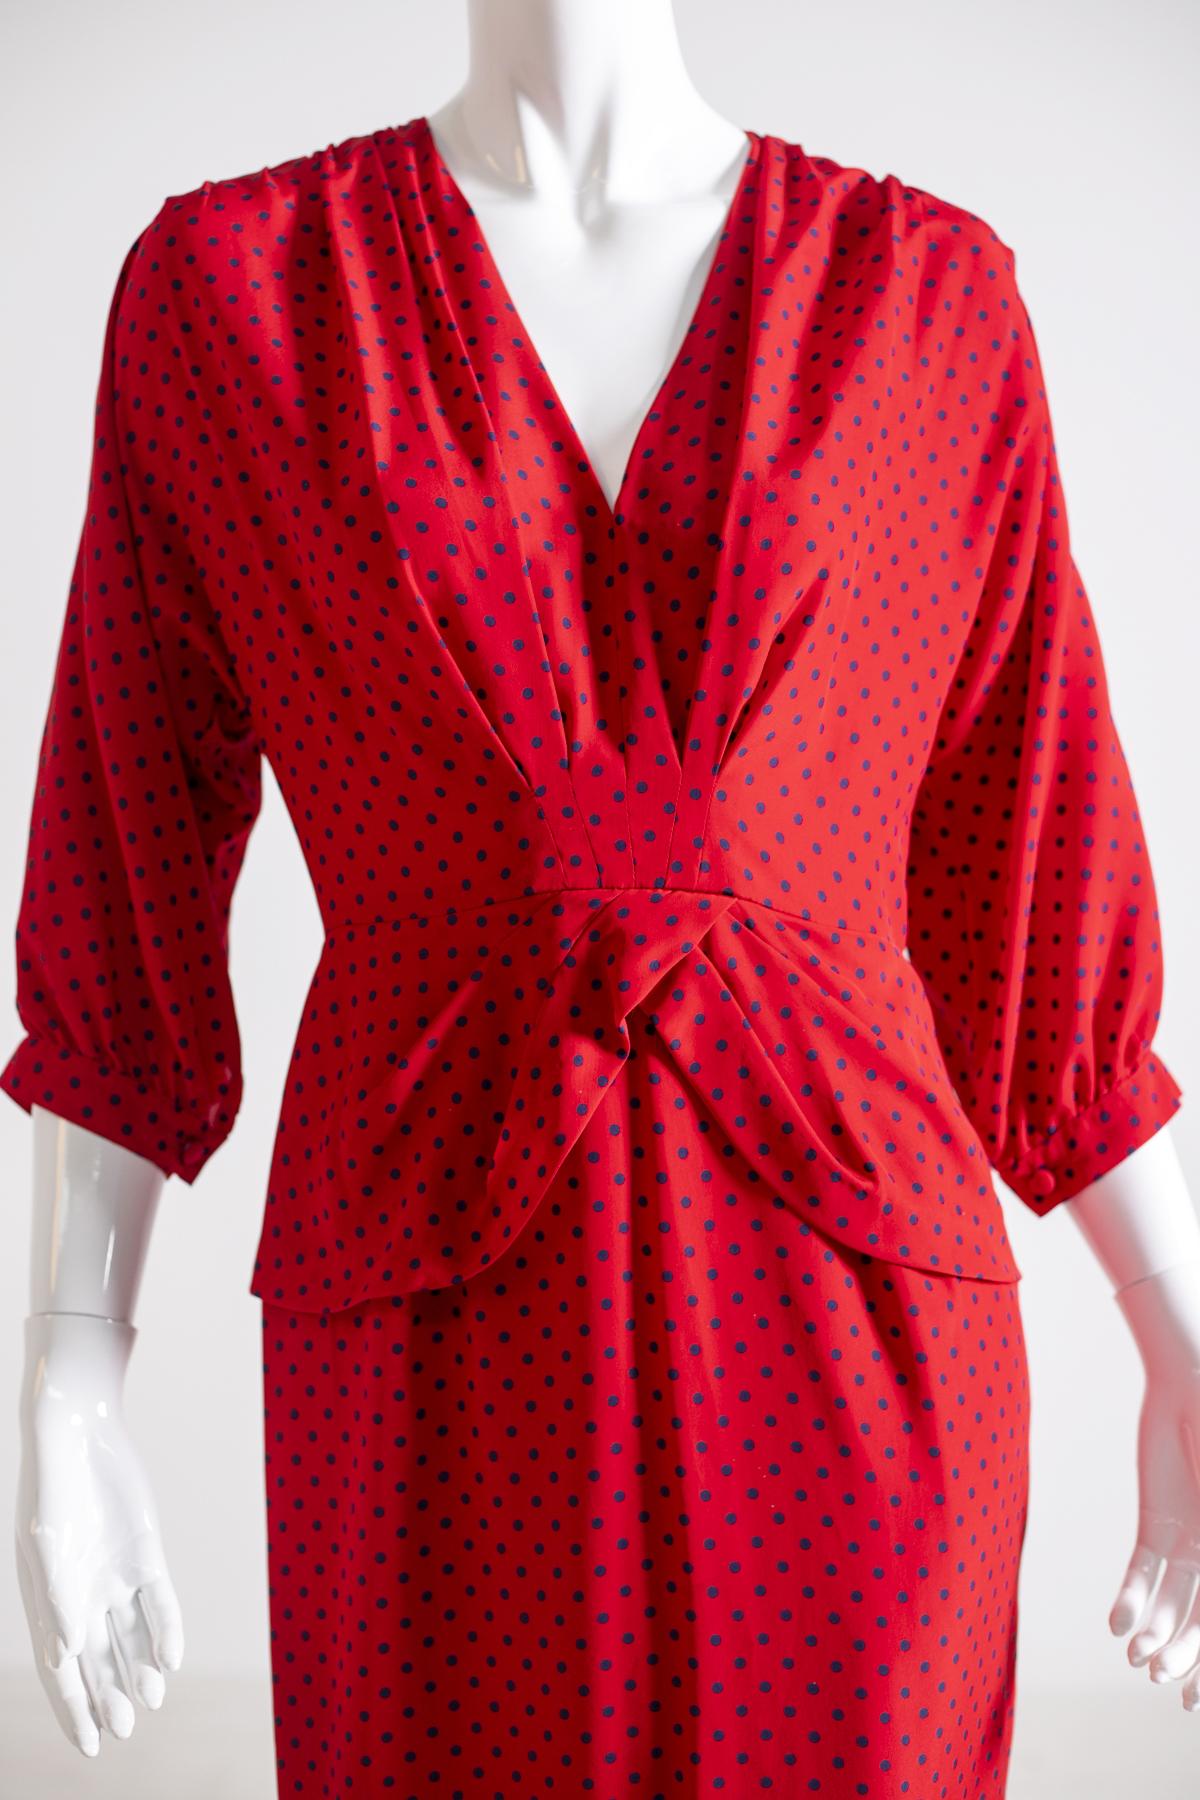 Luisa Spagnoli Vintage Red Dress In Excellent Condition For Sale In Milano, IT